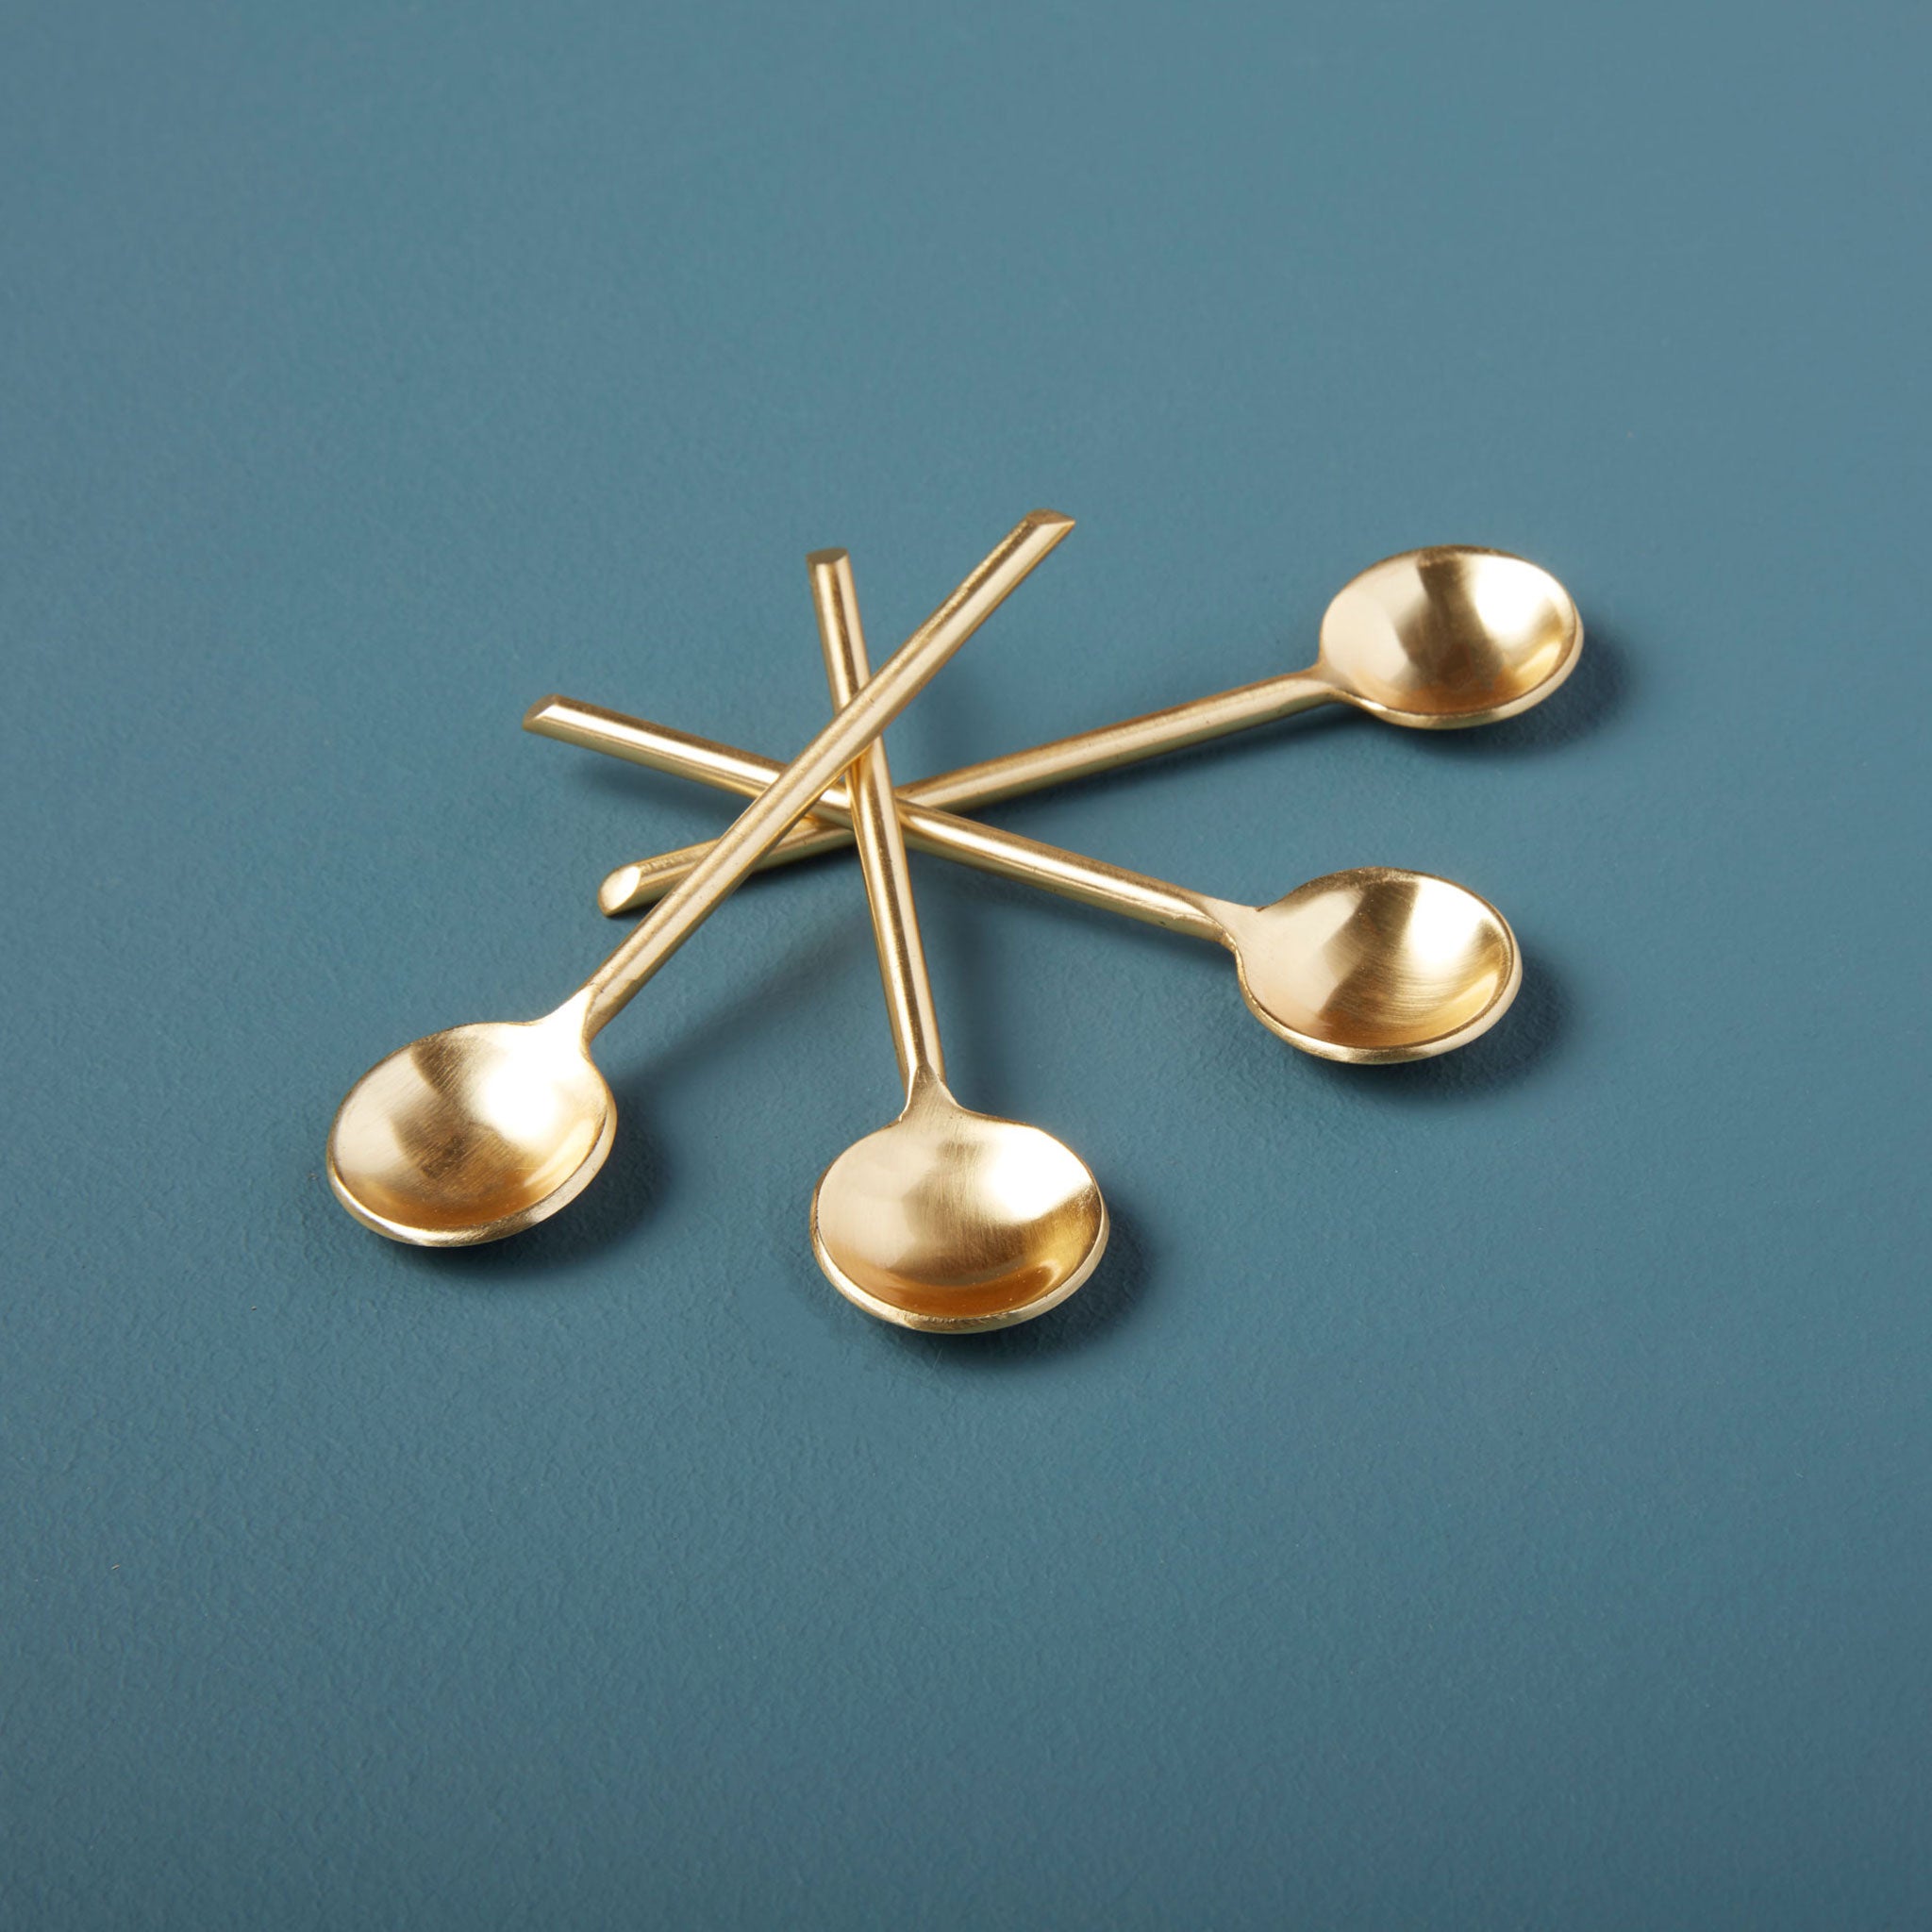 Gold Thin Spoons